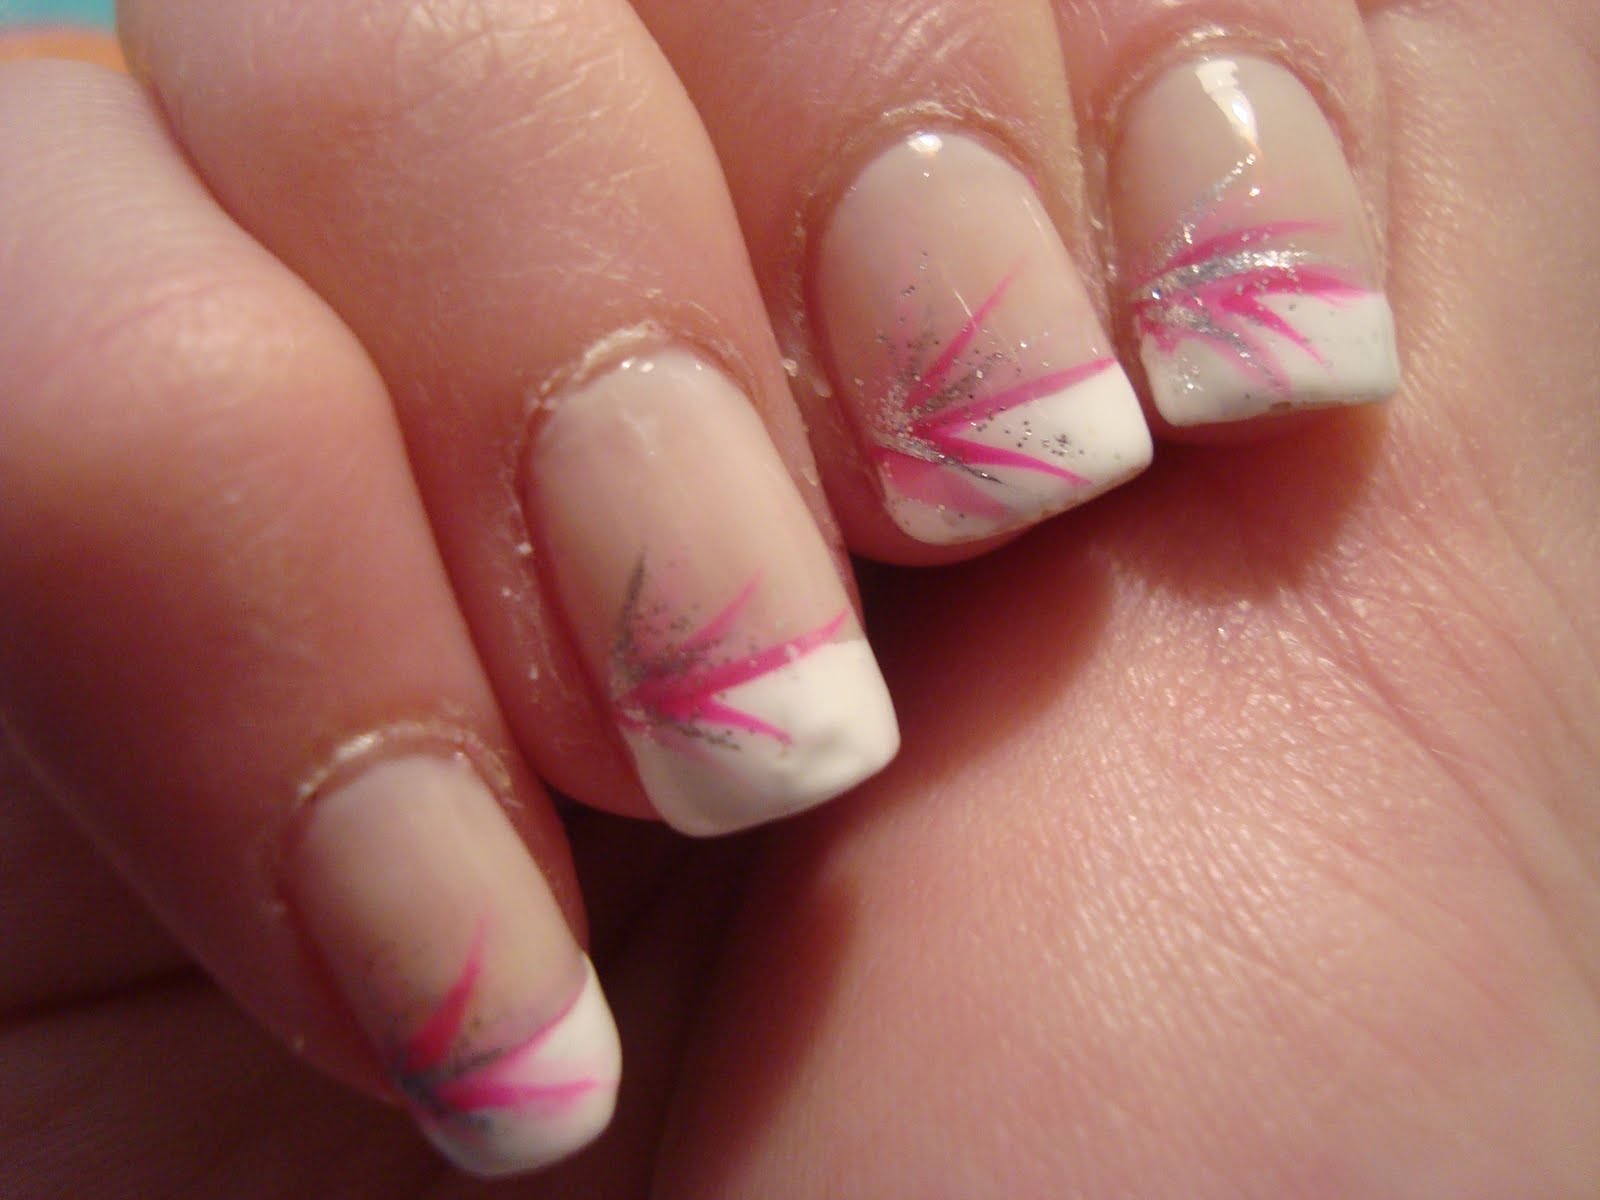 paint that nail: french tip manicure with pink